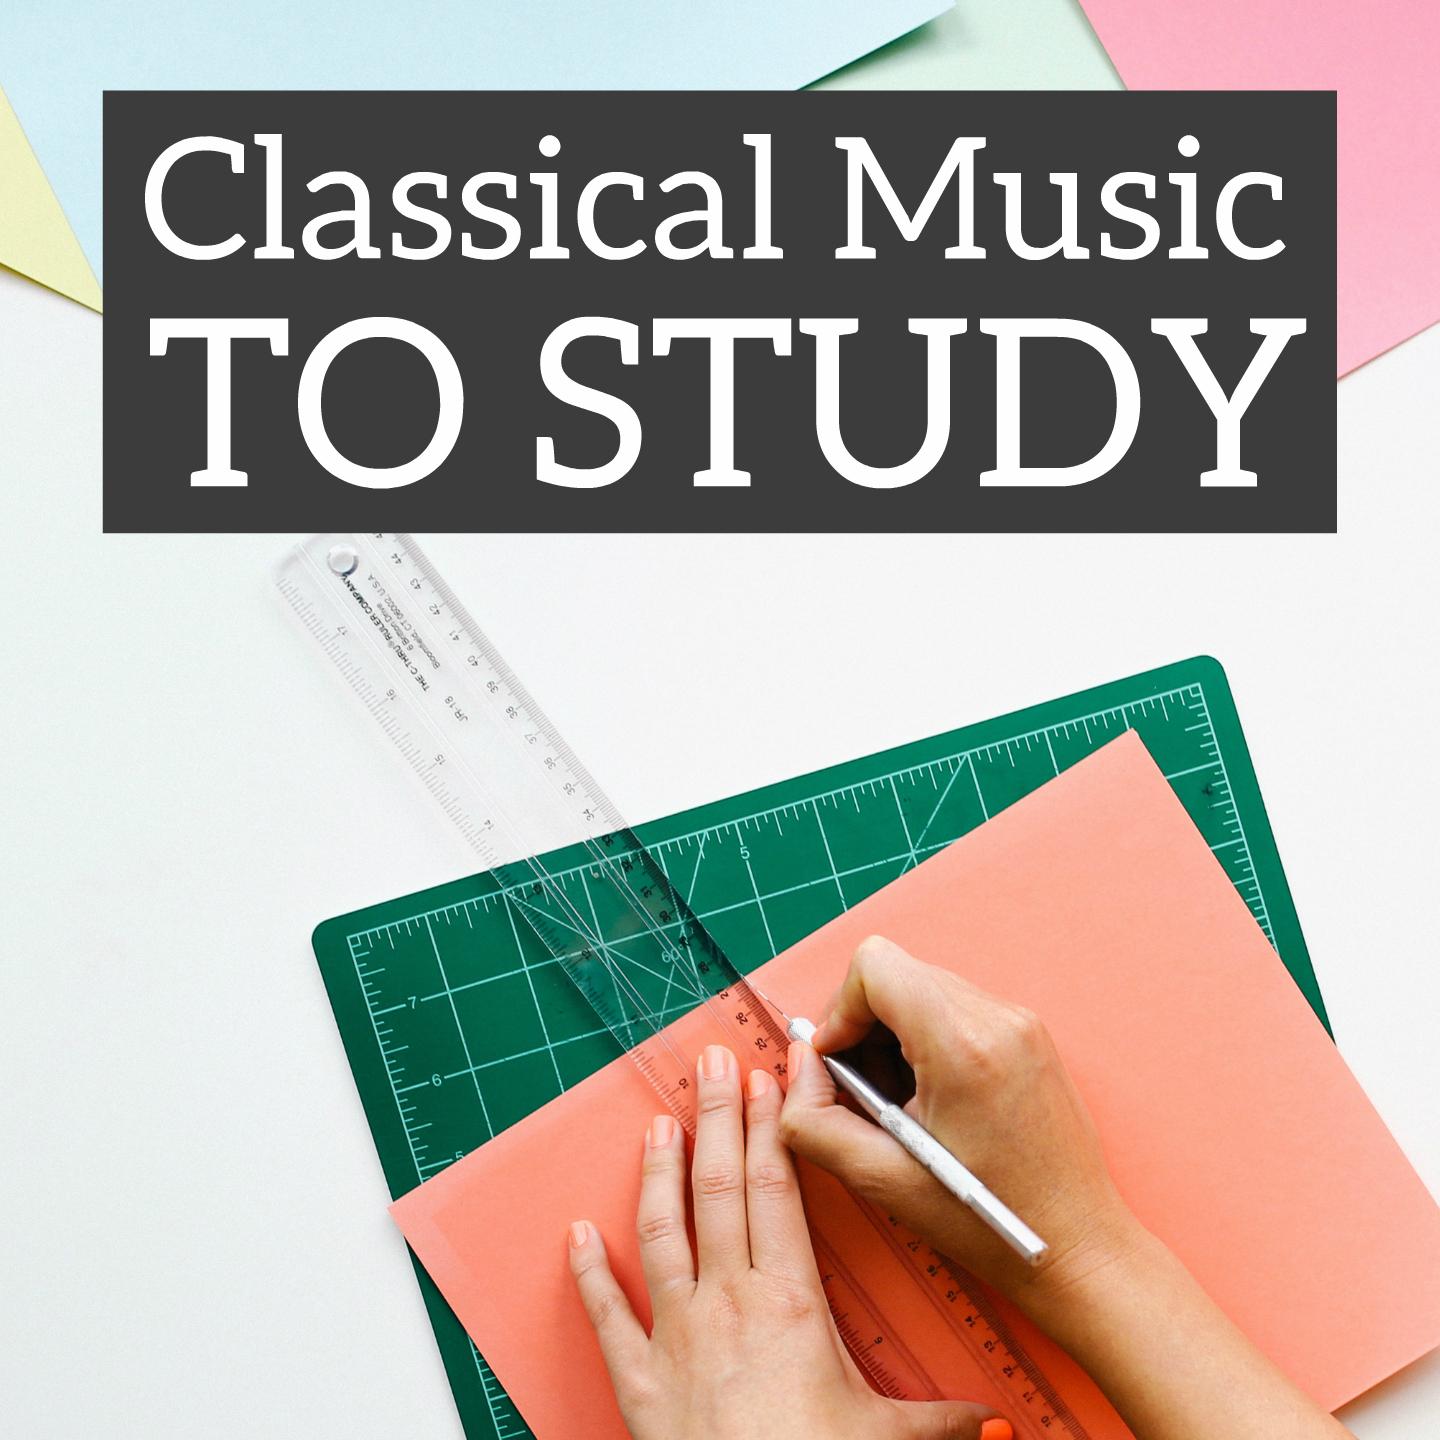 Classical Music To Study